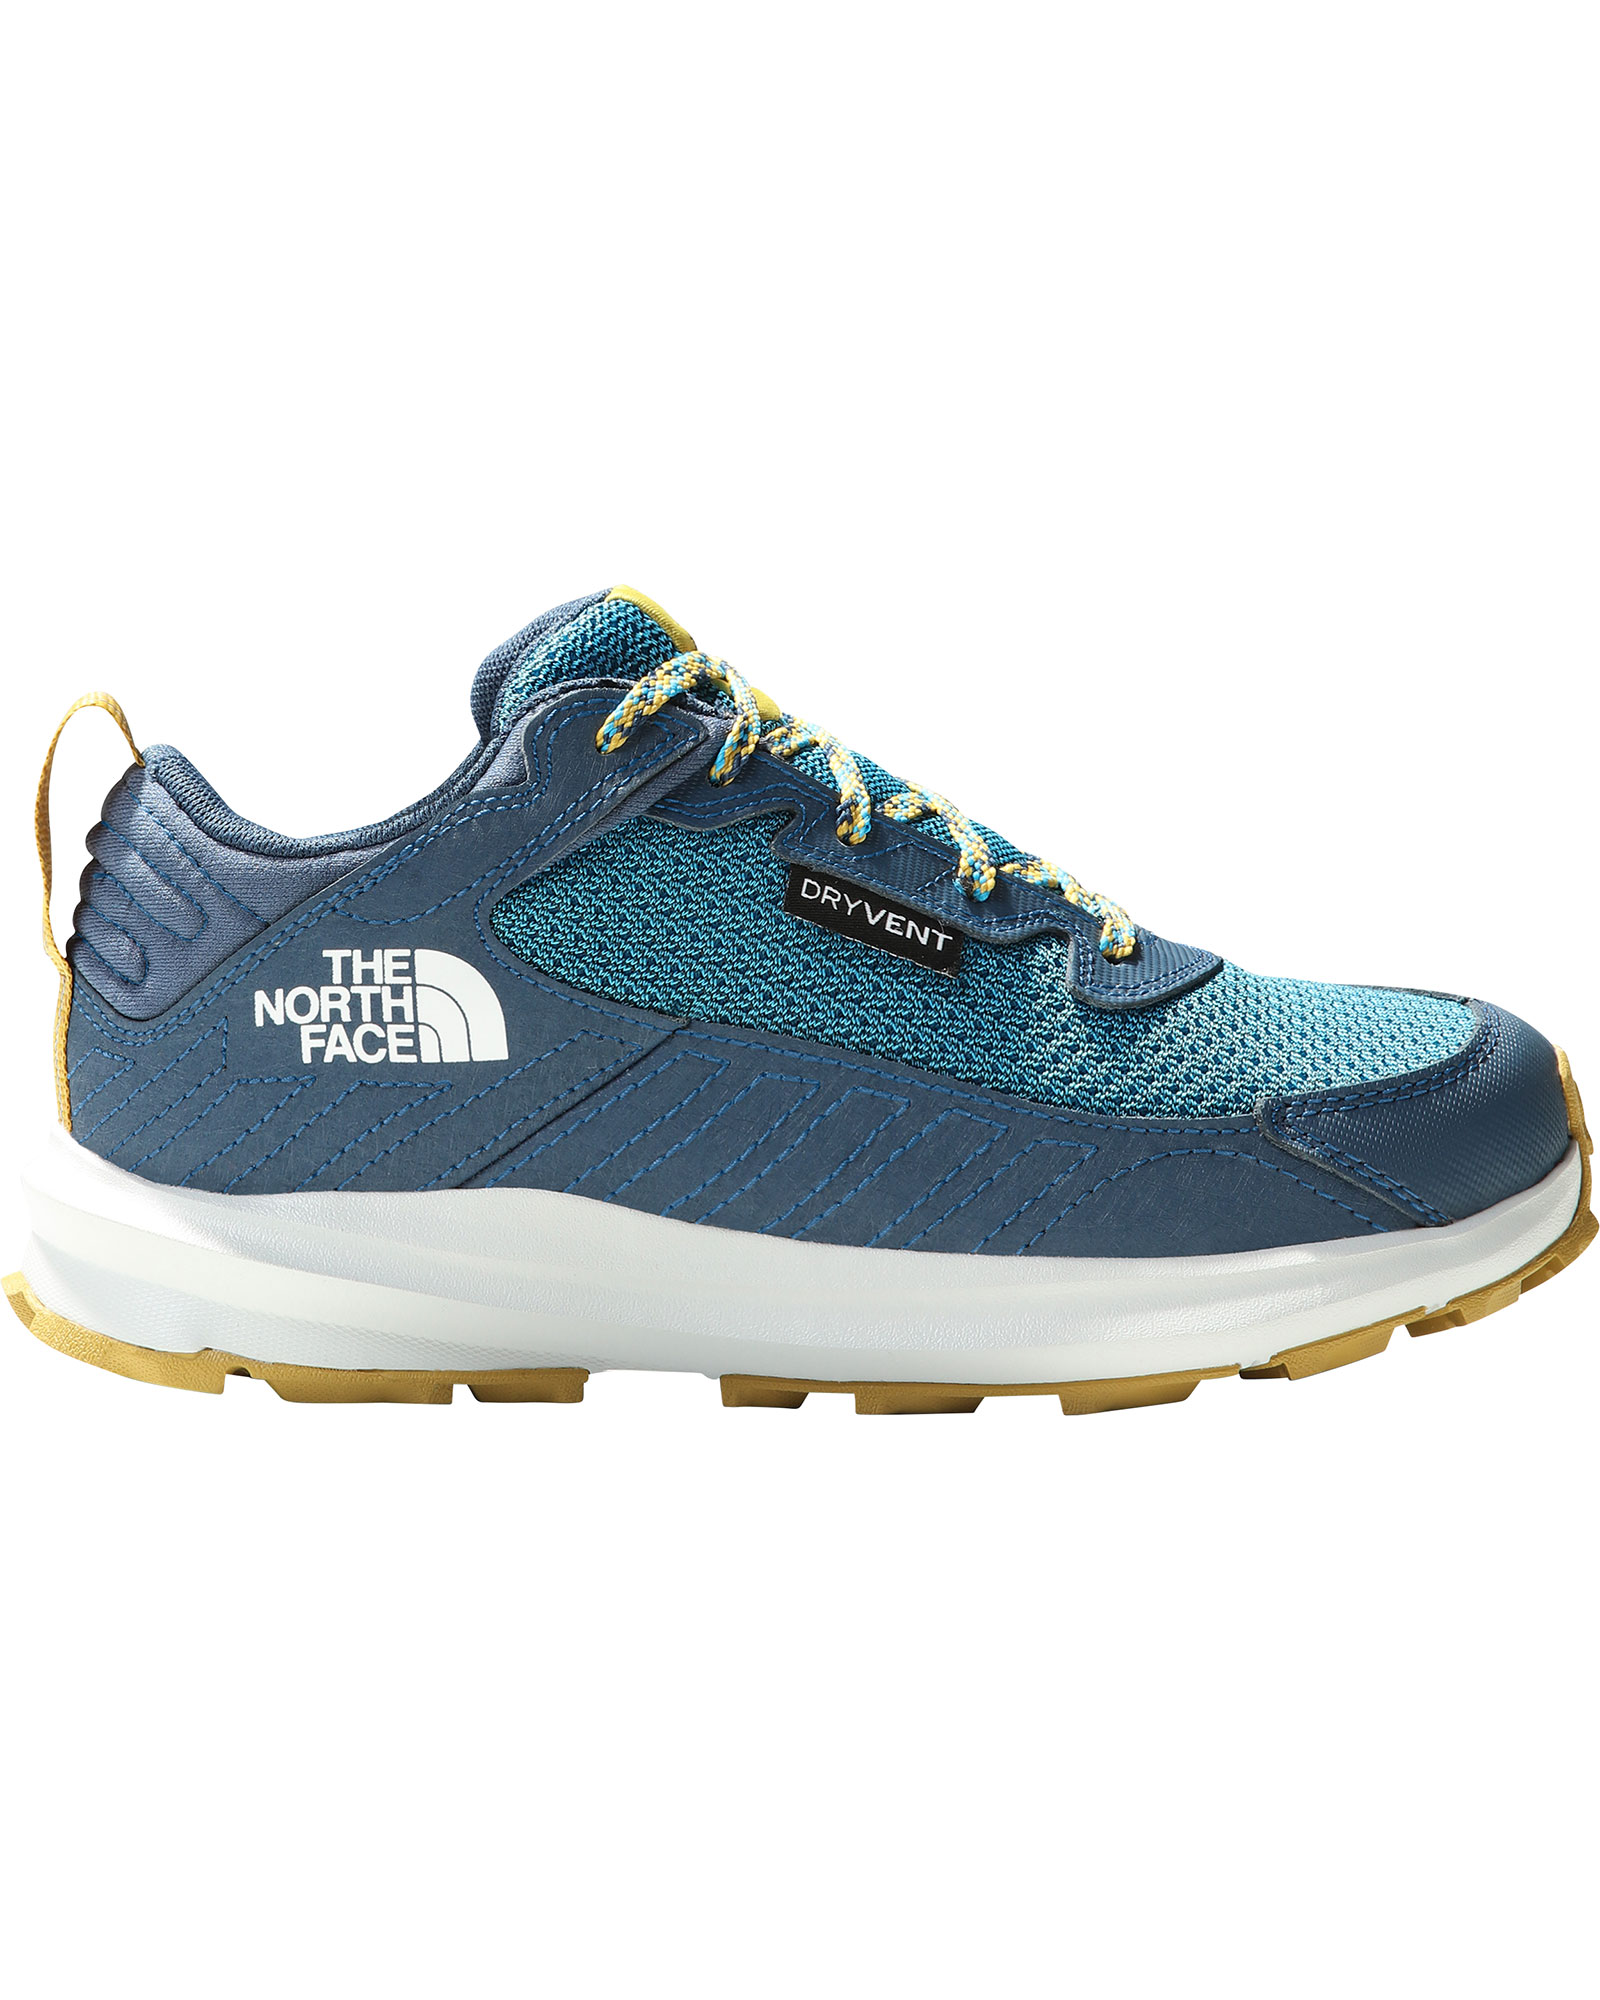 The North Face Youth Fastpack Hiker Kid’s Waterproof Shoes - Acoustic Blue/Shady Blue UK 2